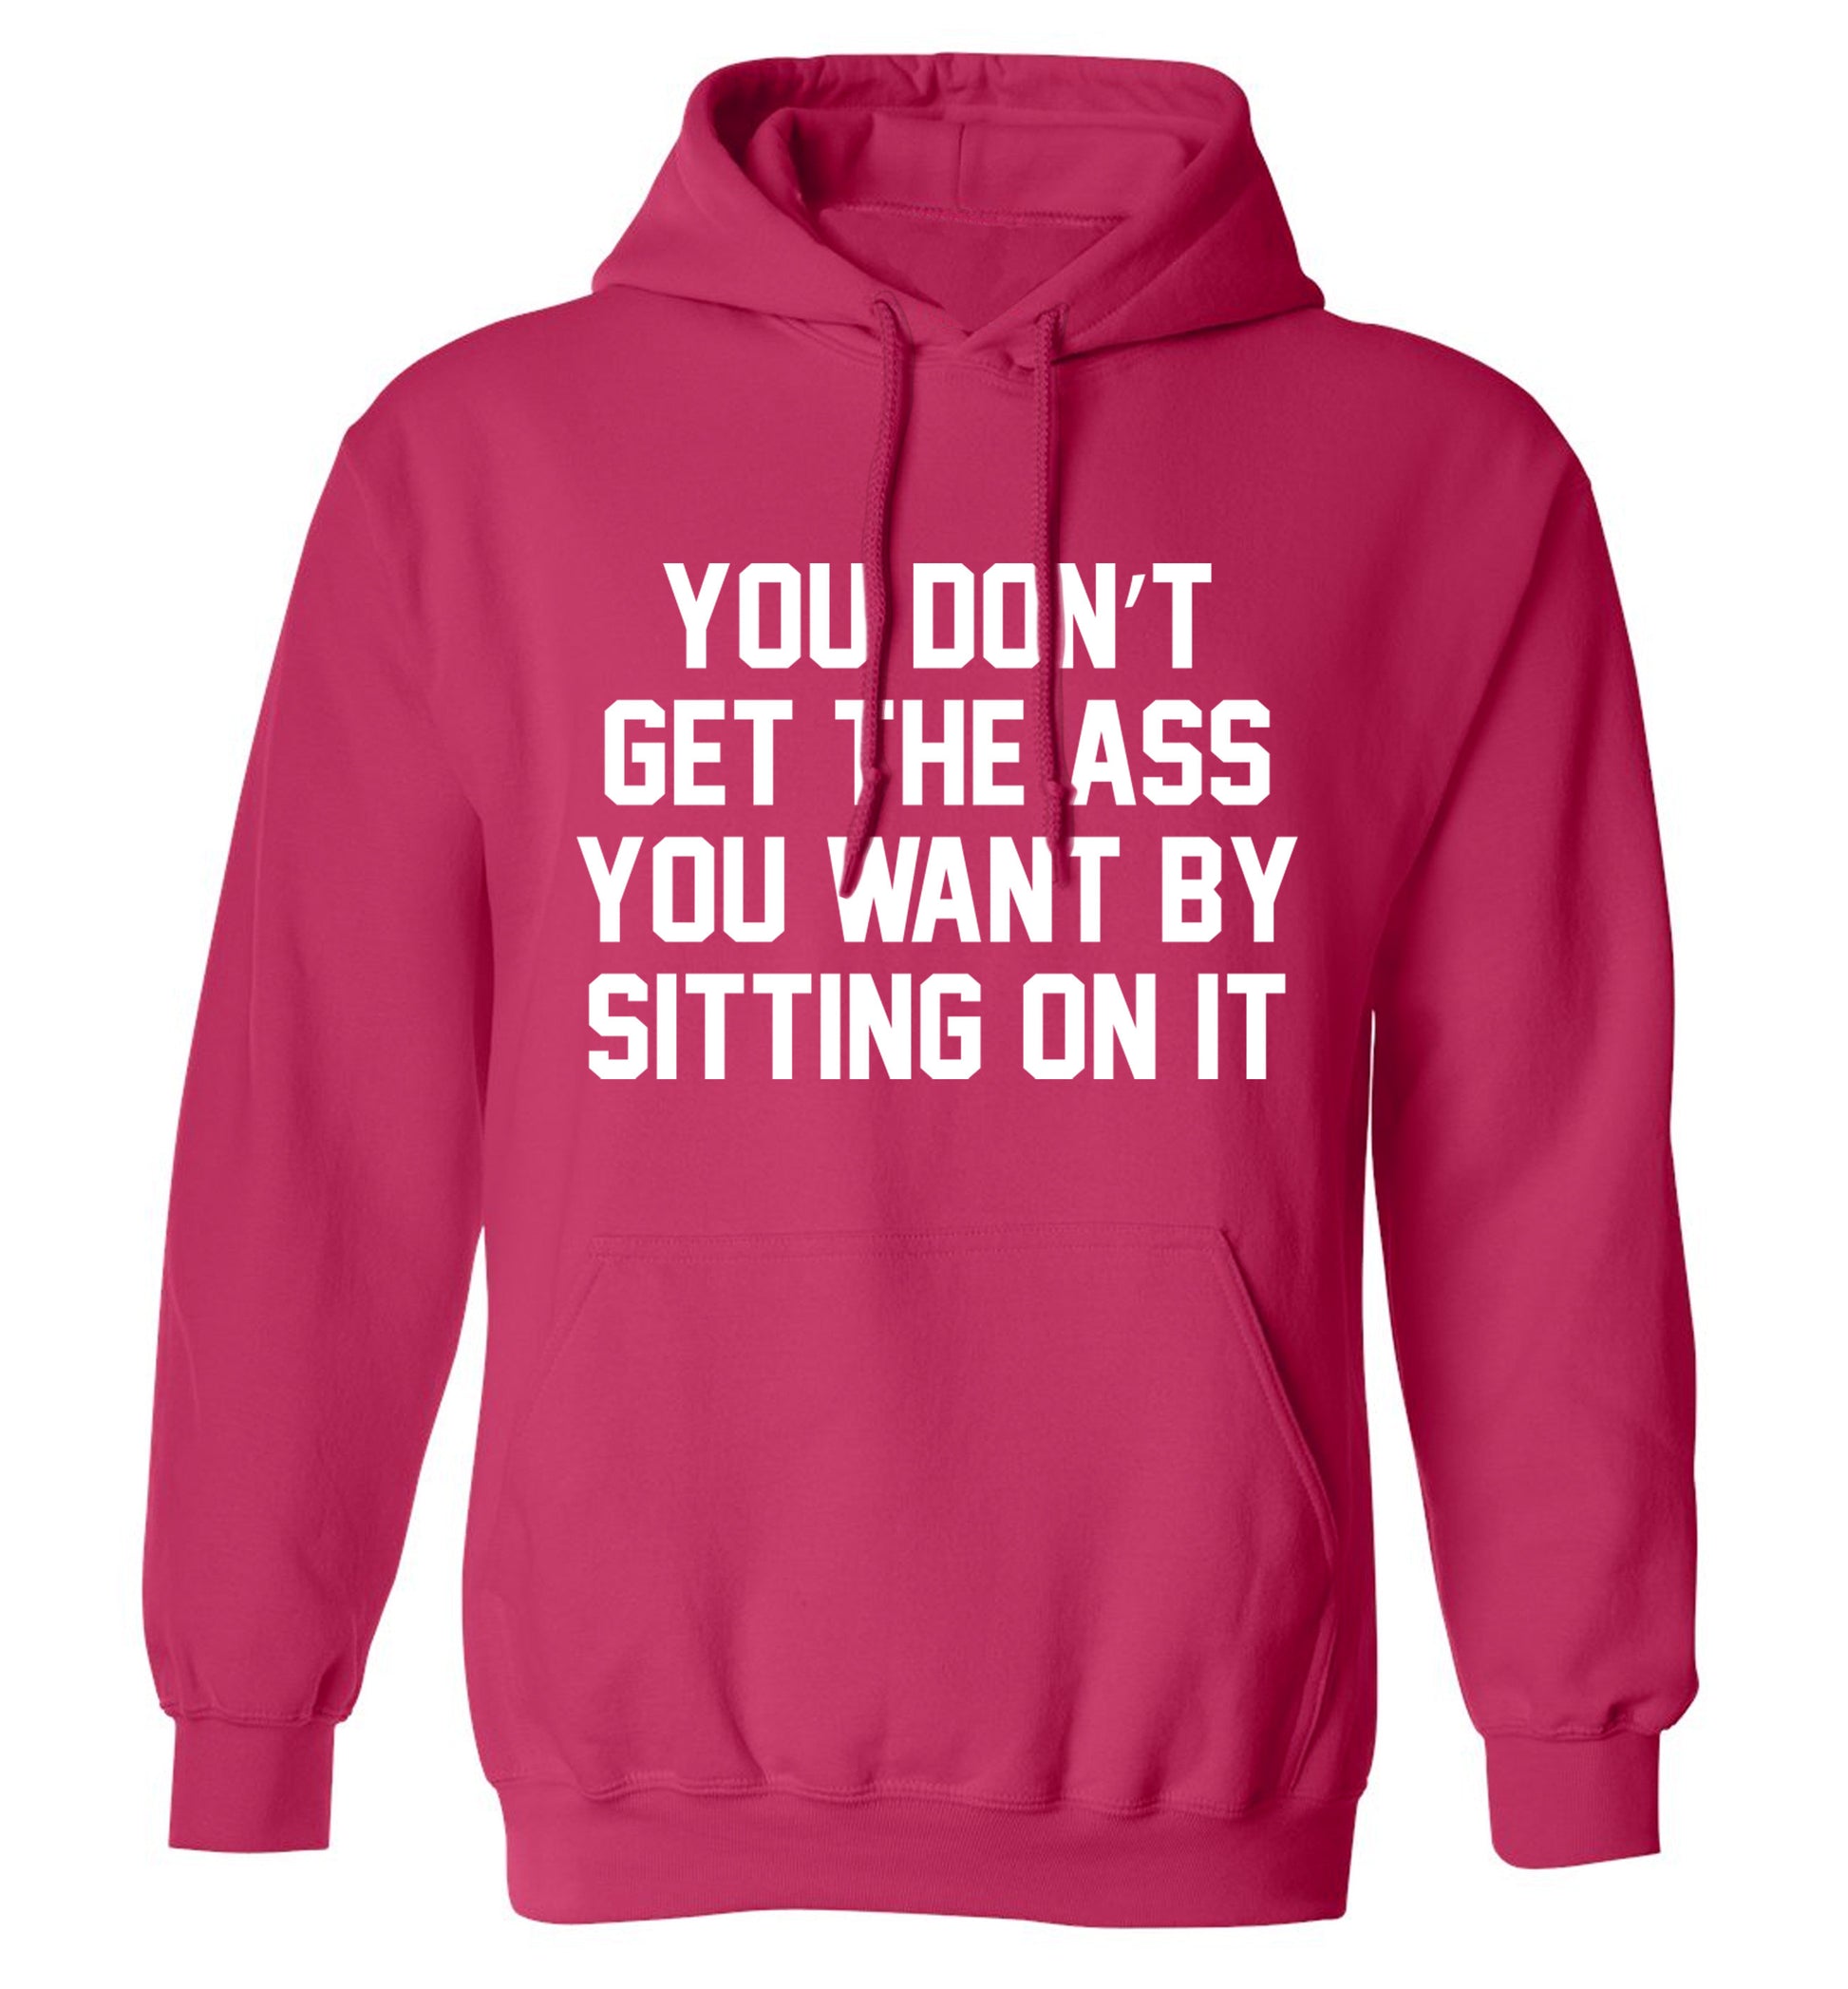 You don't get the ass you want by sitting on it adults unisex pink hoodie 2XL